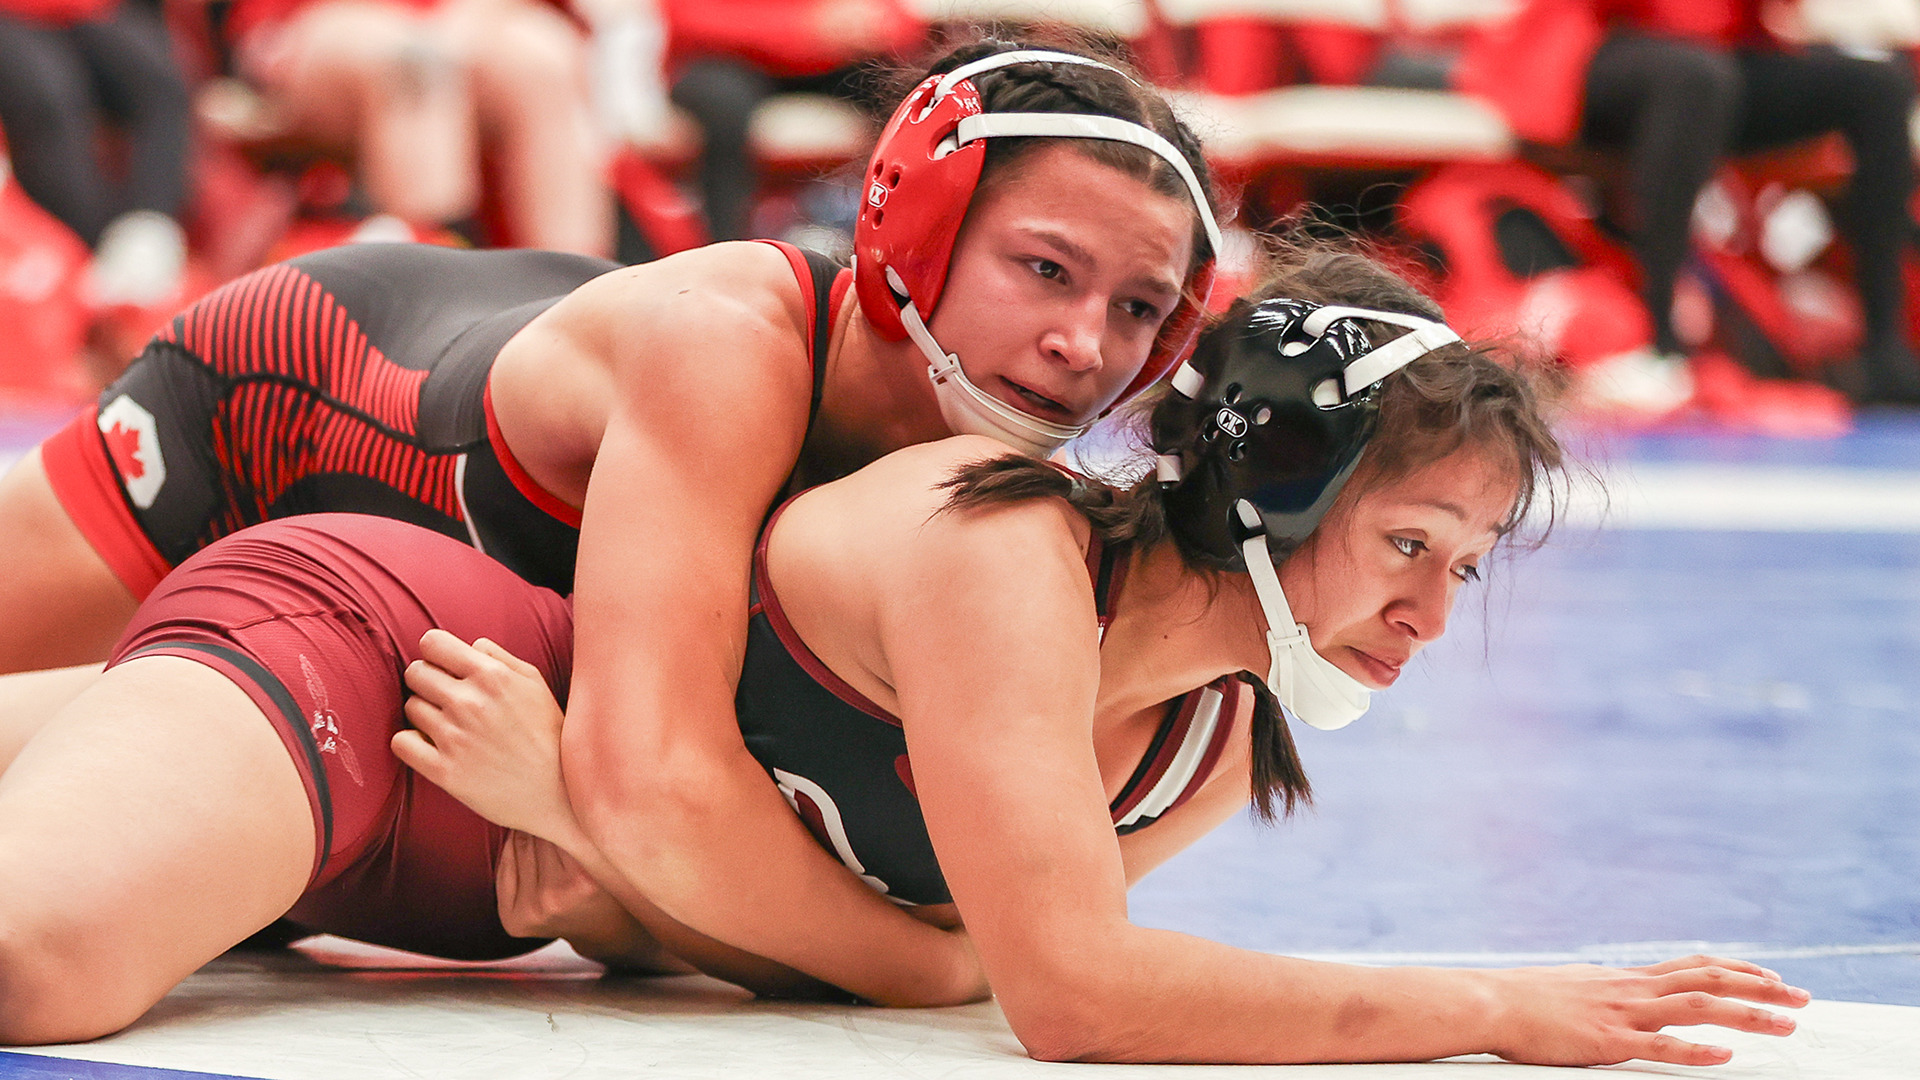 SFU women’s wrestler Victoria Seal with the upper hand against her opponent.